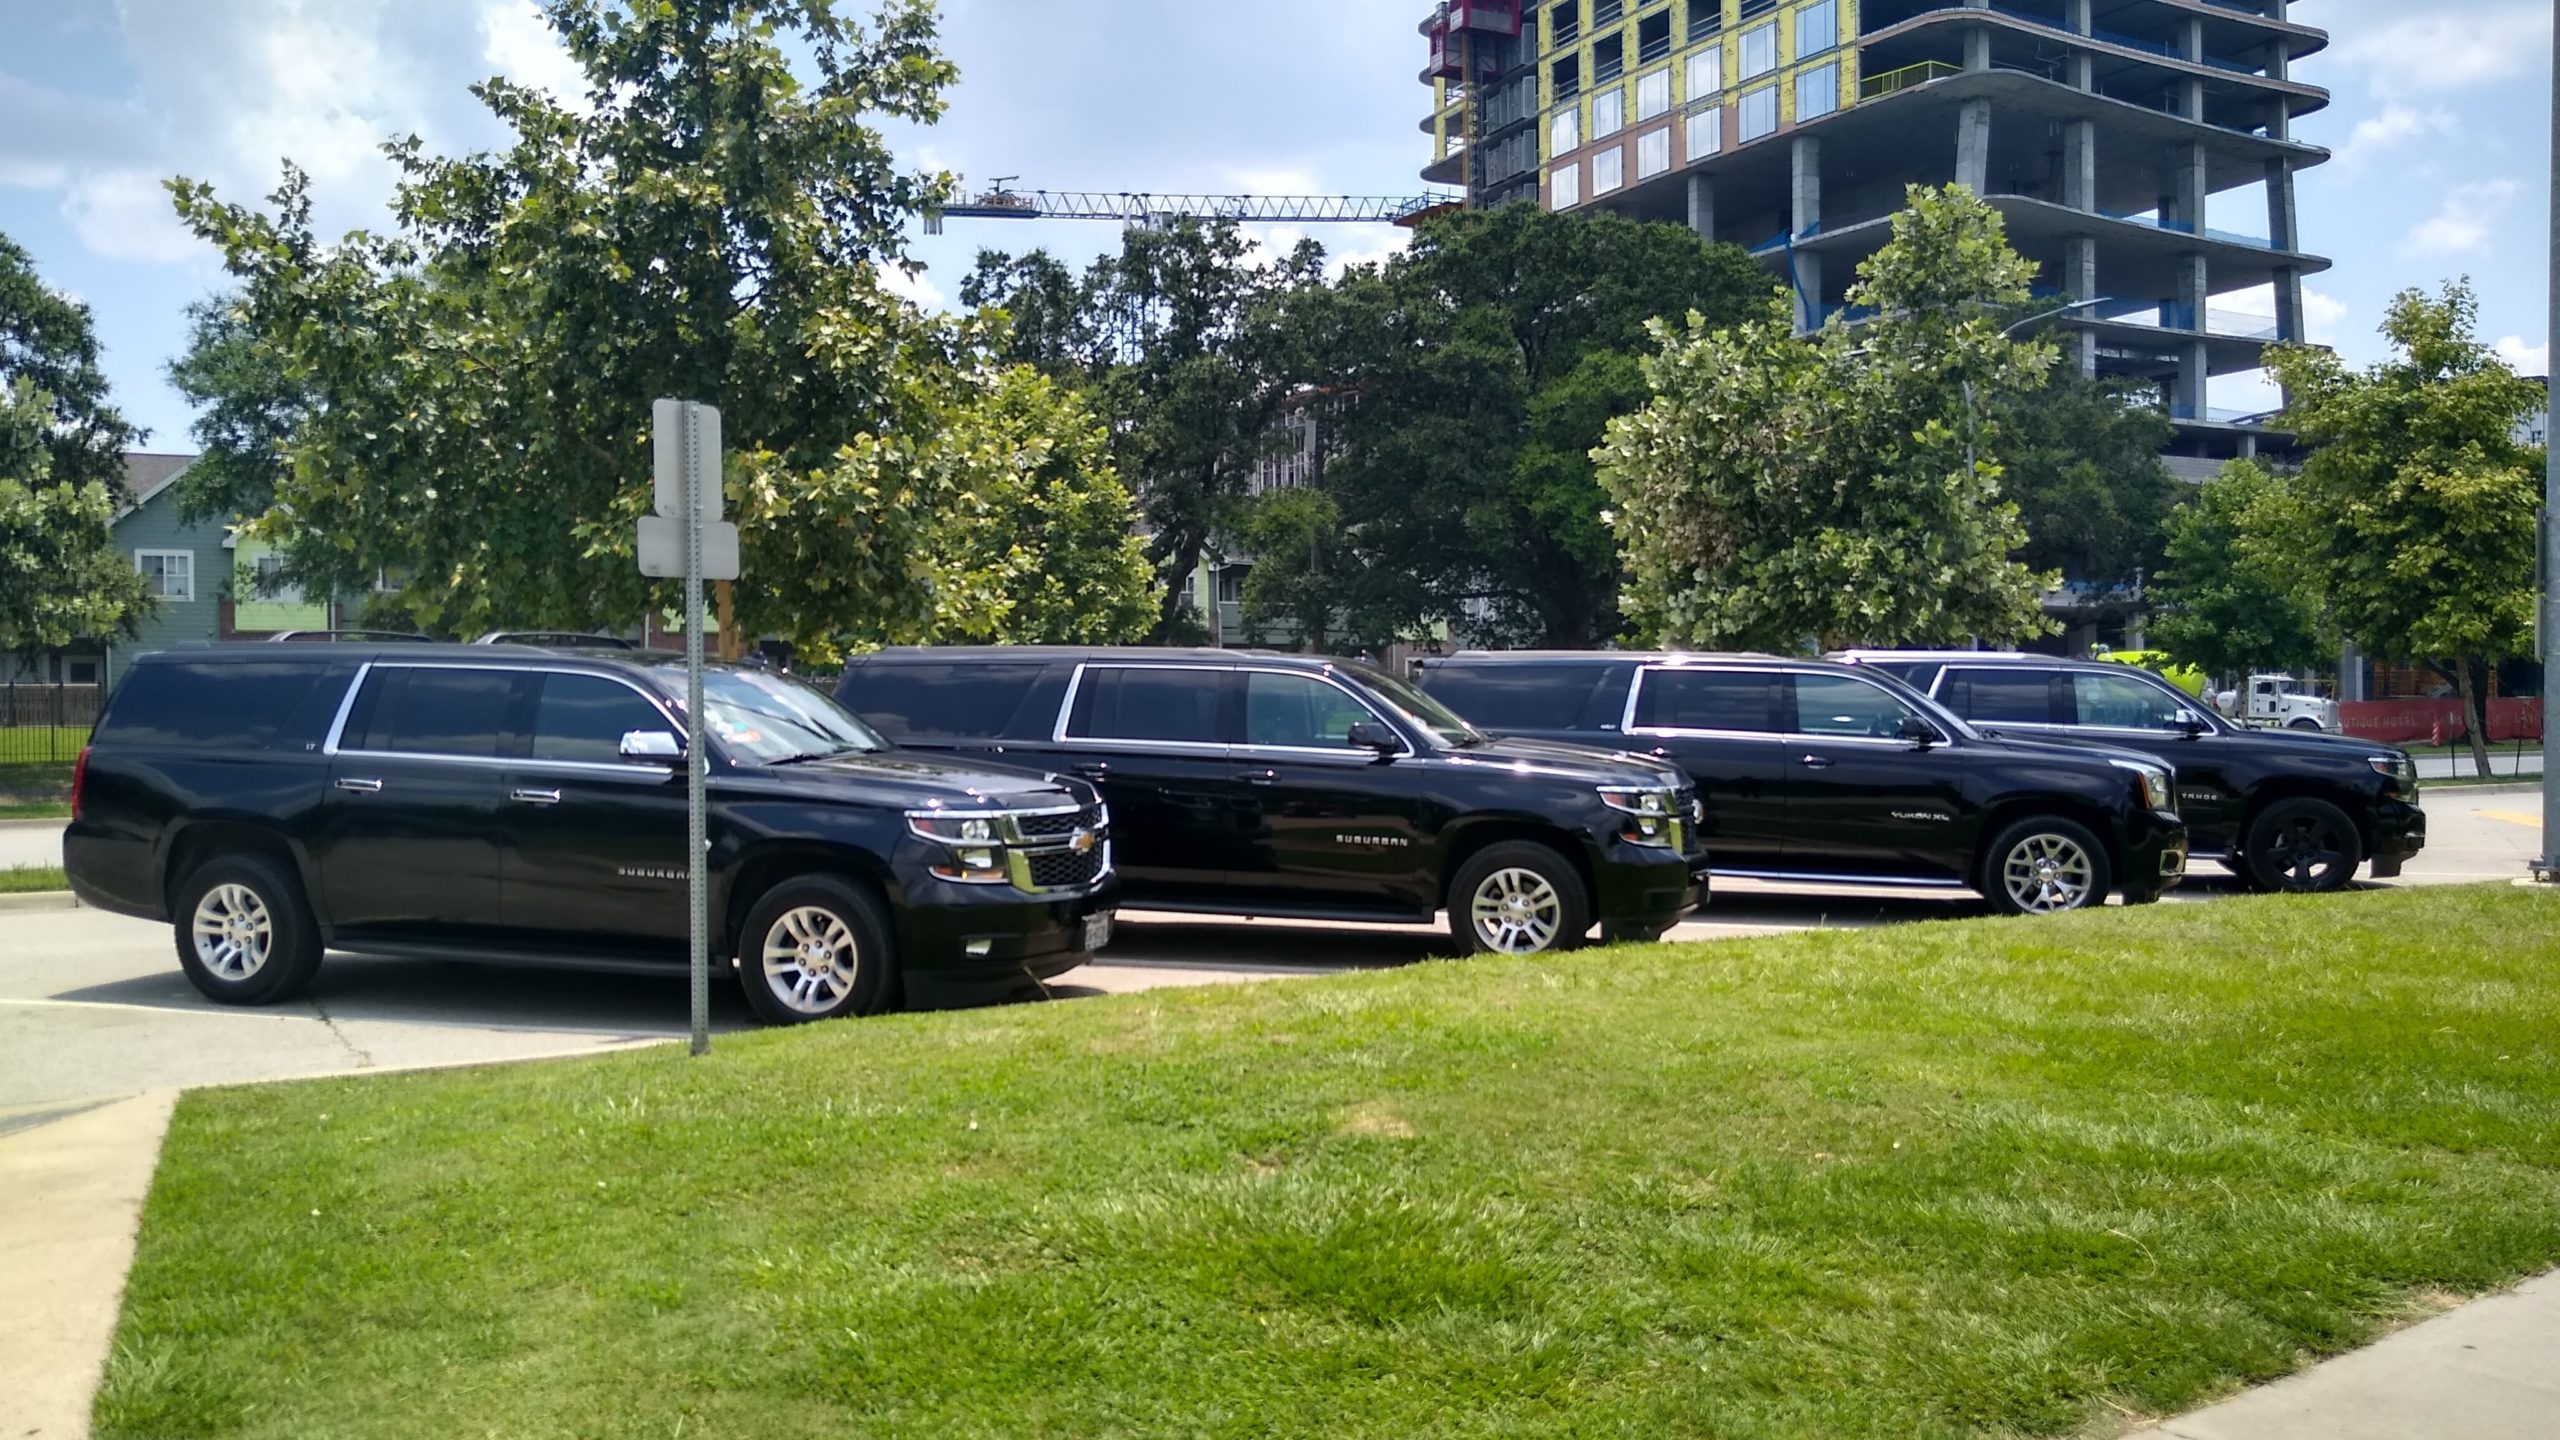 The best way to get around is with luxury limo service Houston